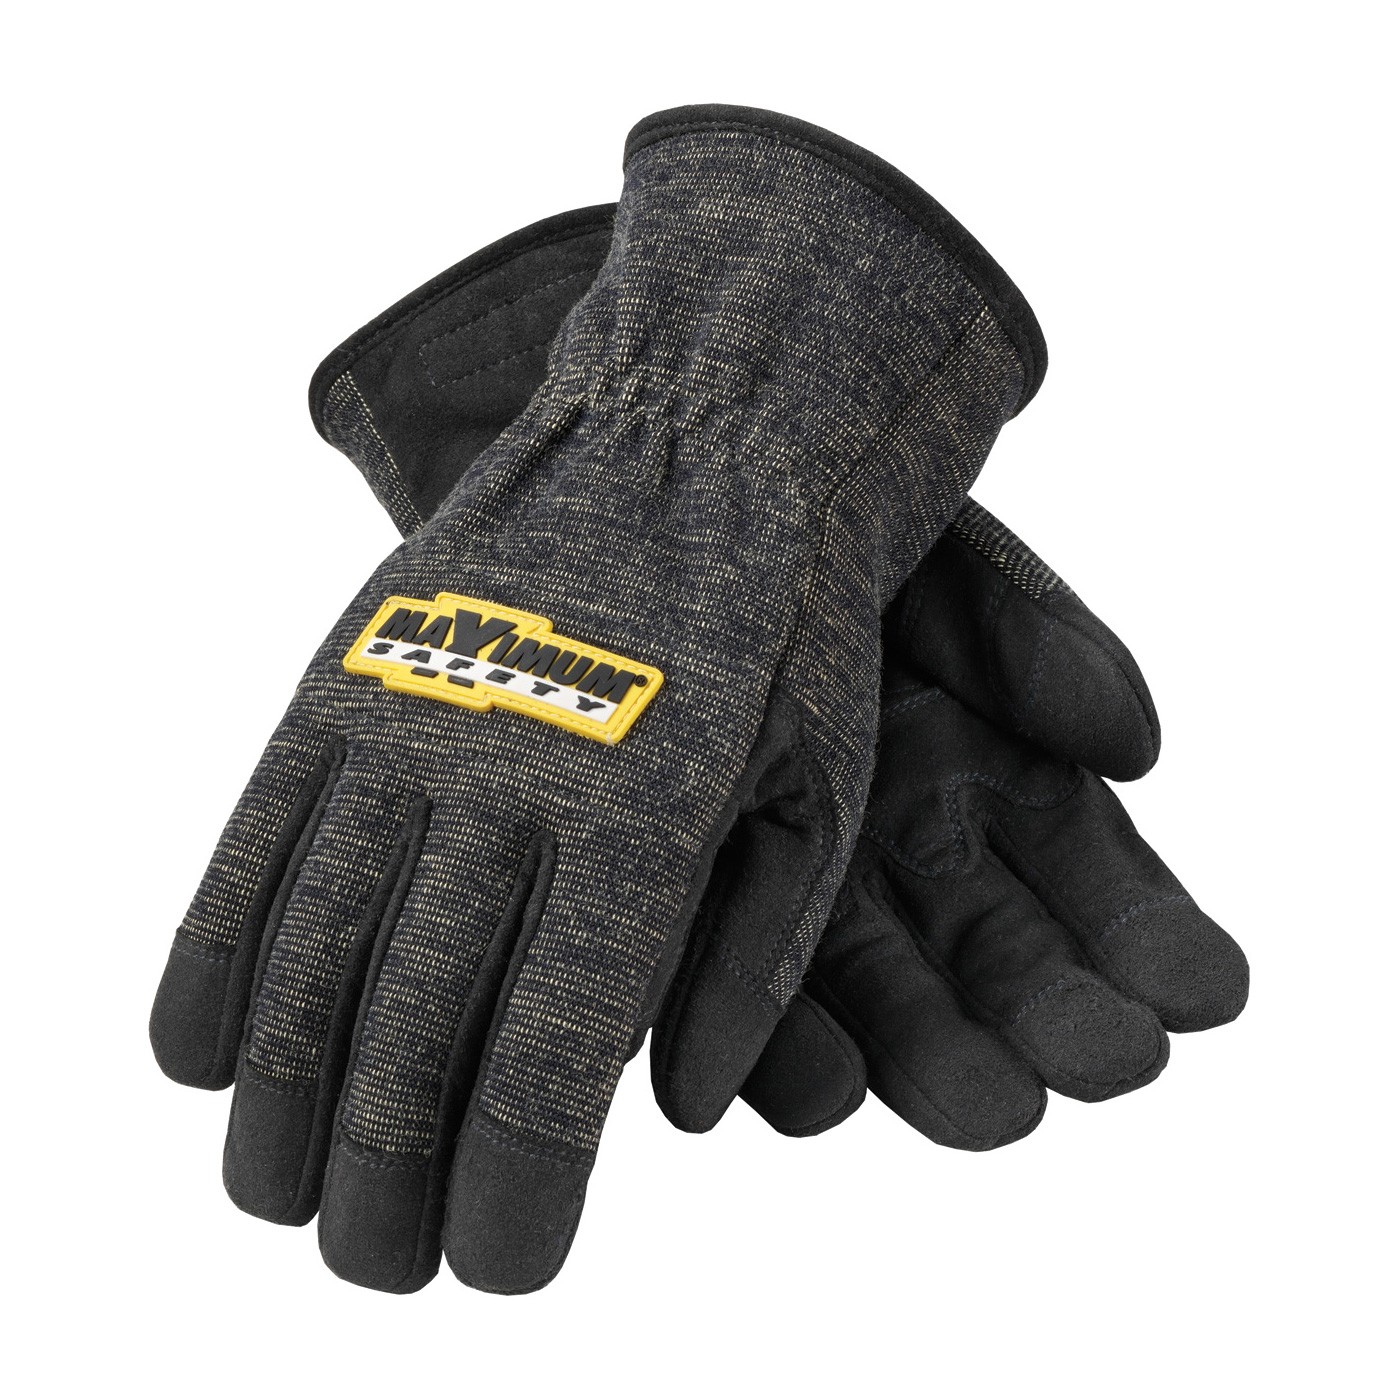 FR Treated Synthetic Leather Glove, Kevlar Lined, Reinforced Palm Size Large